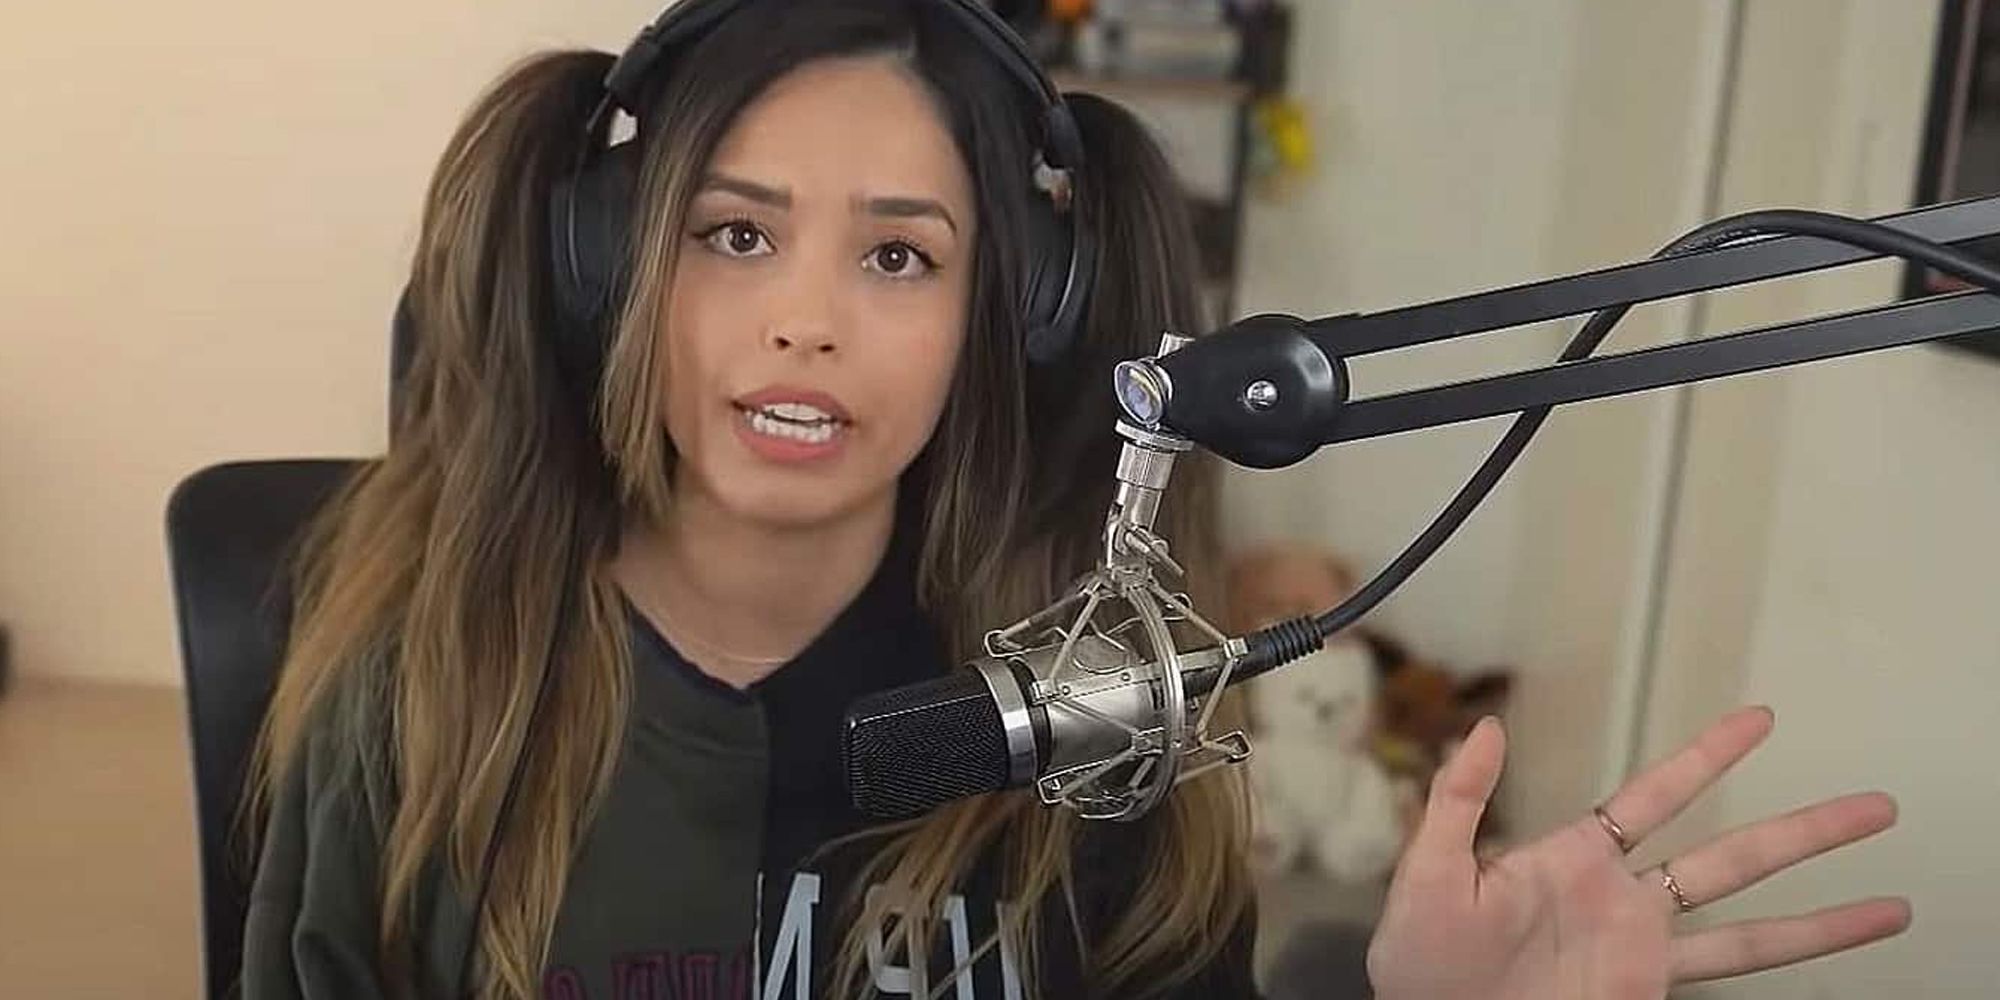 Valkyrae looking at the camera while speaking into a microphone during a stream